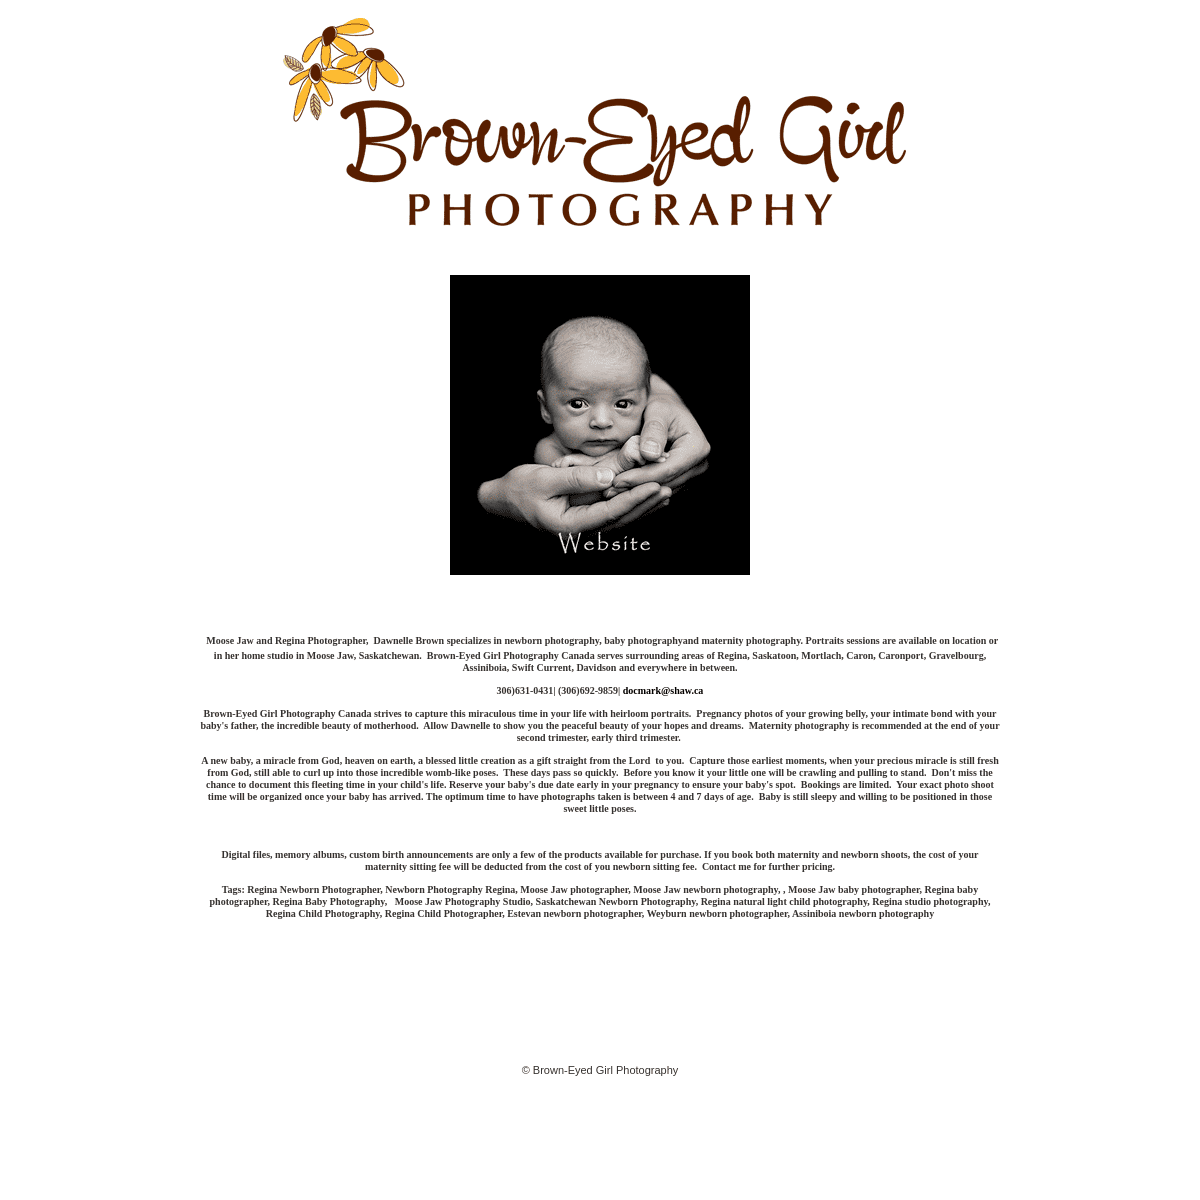 A complete backup of https://brown-eyedgirlphotography.ca